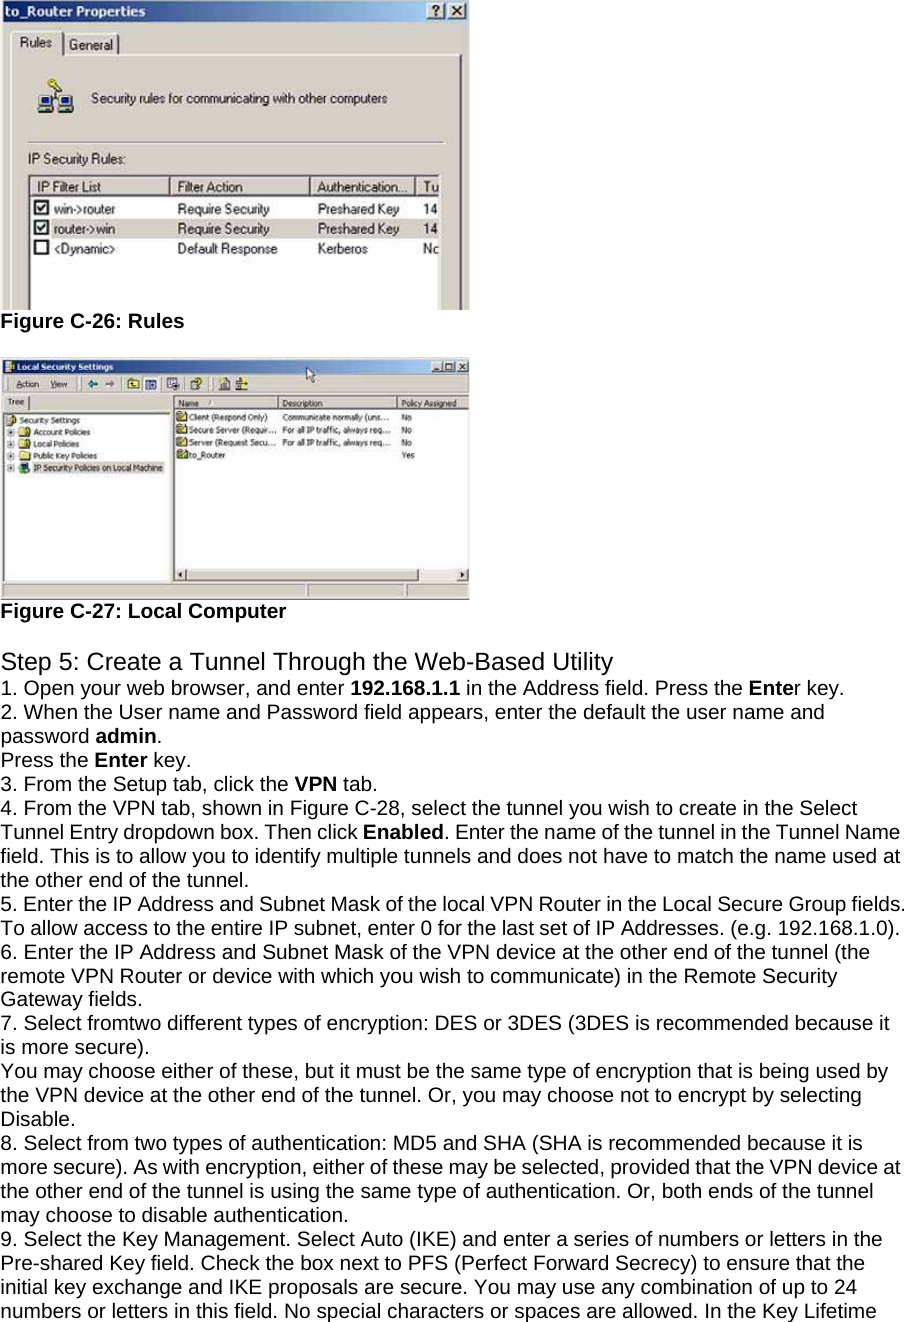  Figure C-26: Rules   Figure C-27: Local Computer  Step 5: Create a Tunnel Through the Web-Based Utility 1. Open your web browser, and enter 192.168.1.1 in the Address field. Press the Enter key. 2. When the User name and Password field appears, enter the default the user name and password admin. Press the Enter key. 3. From the Setup tab, click the VPN tab. 4. From the VPN tab, shown in Figure C-28, select the tunnel you wish to create in the Select Tunnel Entry dropdown box. Then click Enabled. Enter the name of the tunnel in the Tunnel Name field. This is to allow you to identify multiple tunnels and does not have to match the name used at the other end of the tunnel. 5. Enter the IP Address and Subnet Mask of the local VPN Router in the Local Secure Group fields. To allow access to the entire IP subnet, enter 0 for the last set of IP Addresses. (e.g. 192.168.1.0). 6. Enter the IP Address and Subnet Mask of the VPN device at the other end of the tunnel (the remote VPN Router or device with which you wish to communicate) in the Remote Security Gateway fields. 7. Select fromtwo different types of encryption: DES or 3DES (3DES is recommended because it is more secure). You may choose either of these, but it must be the same type of encryption that is being used by the VPN device at the other end of the tunnel. Or, you may choose not to encrypt by selecting Disable. 8. Select from two types of authentication: MD5 and SHA (SHA is recommended because it is more secure). As with encryption, either of these may be selected, provided that the VPN device at the other end of the tunnel is using the same type of authentication. Or, both ends of the tunnel may choose to disable authentication. 9. Select the Key Management. Select Auto (IKE) and enter a series of numbers or letters in the Pre-shared Key field. Check the box next to PFS (Perfect Forward Secrecy) to ensure that the initial key exchange and IKE proposals are secure. You may use any combination of up to 24 numbers or letters in this field. No special characters or spaces are allowed. In the Key Lifetime 